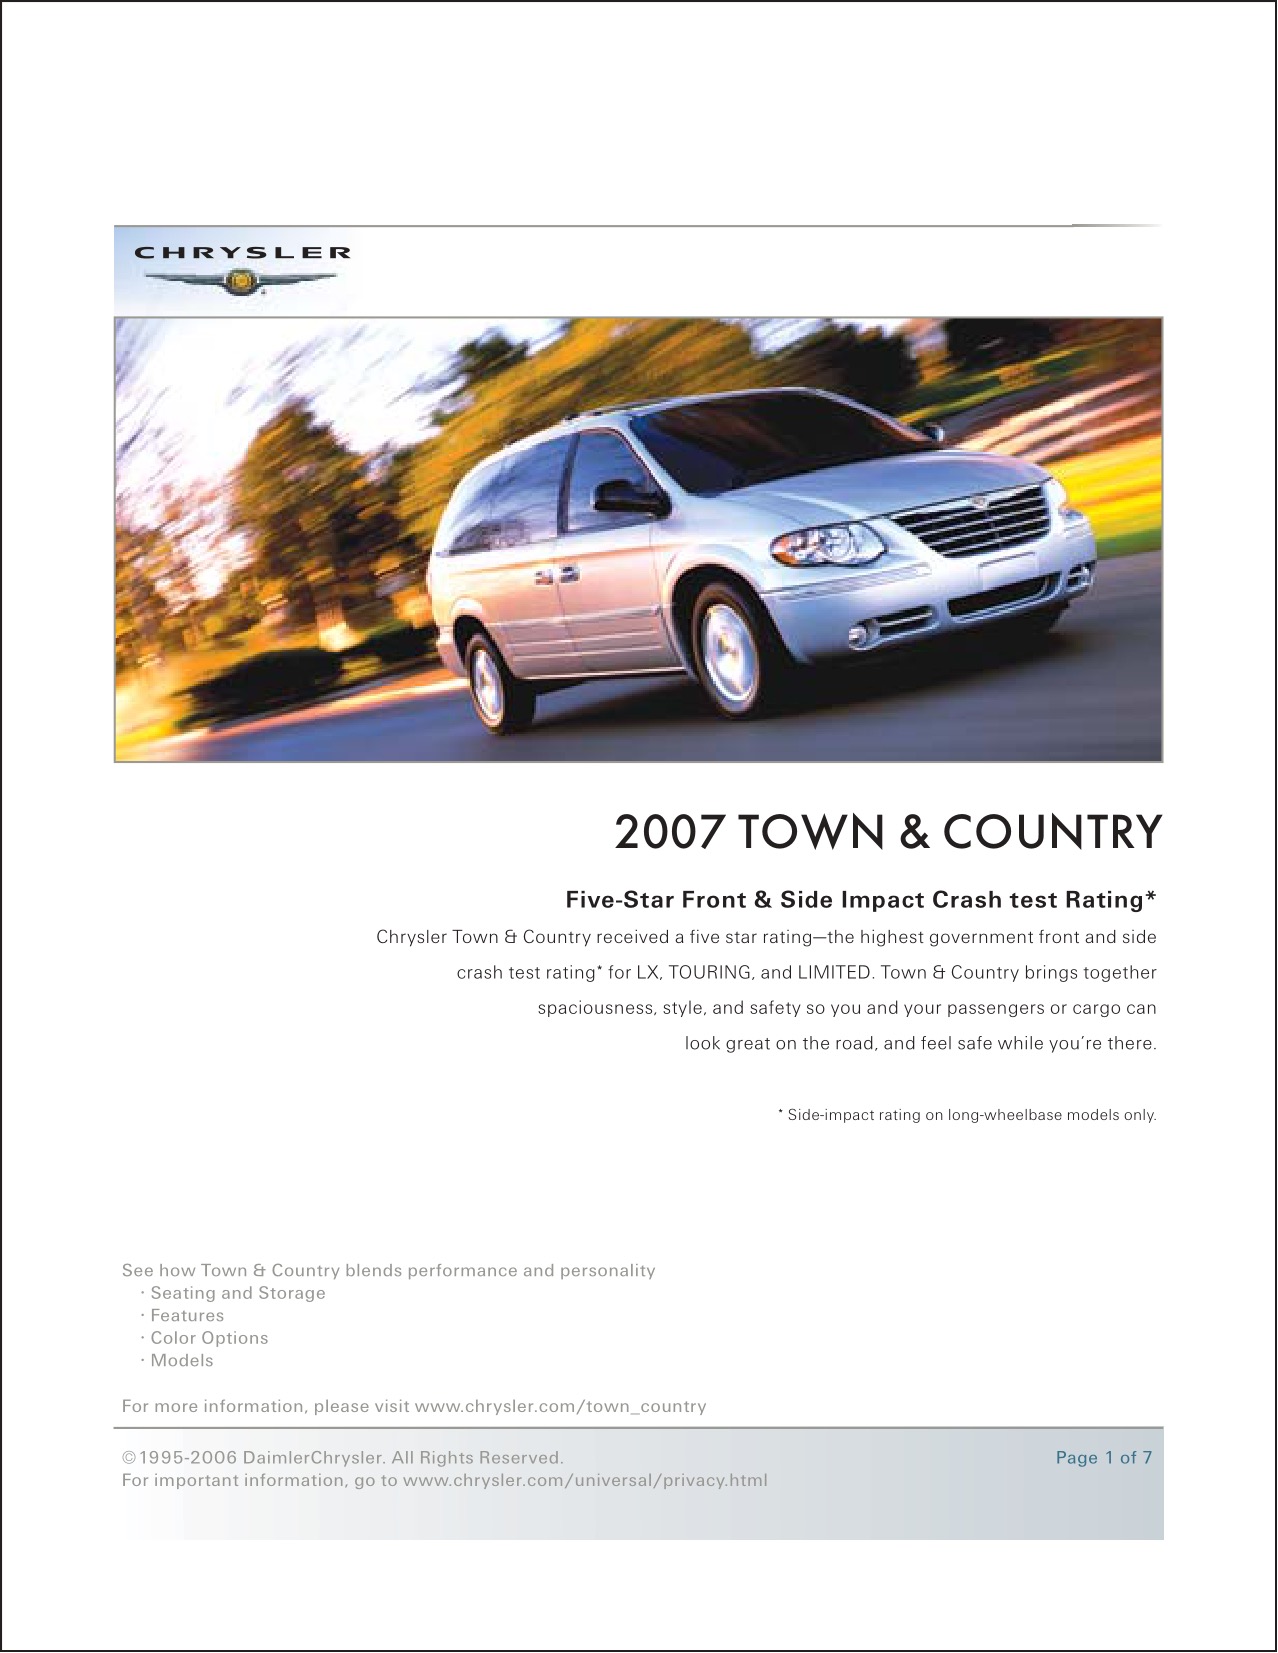 2007 Chrysler Town & Country Brochure